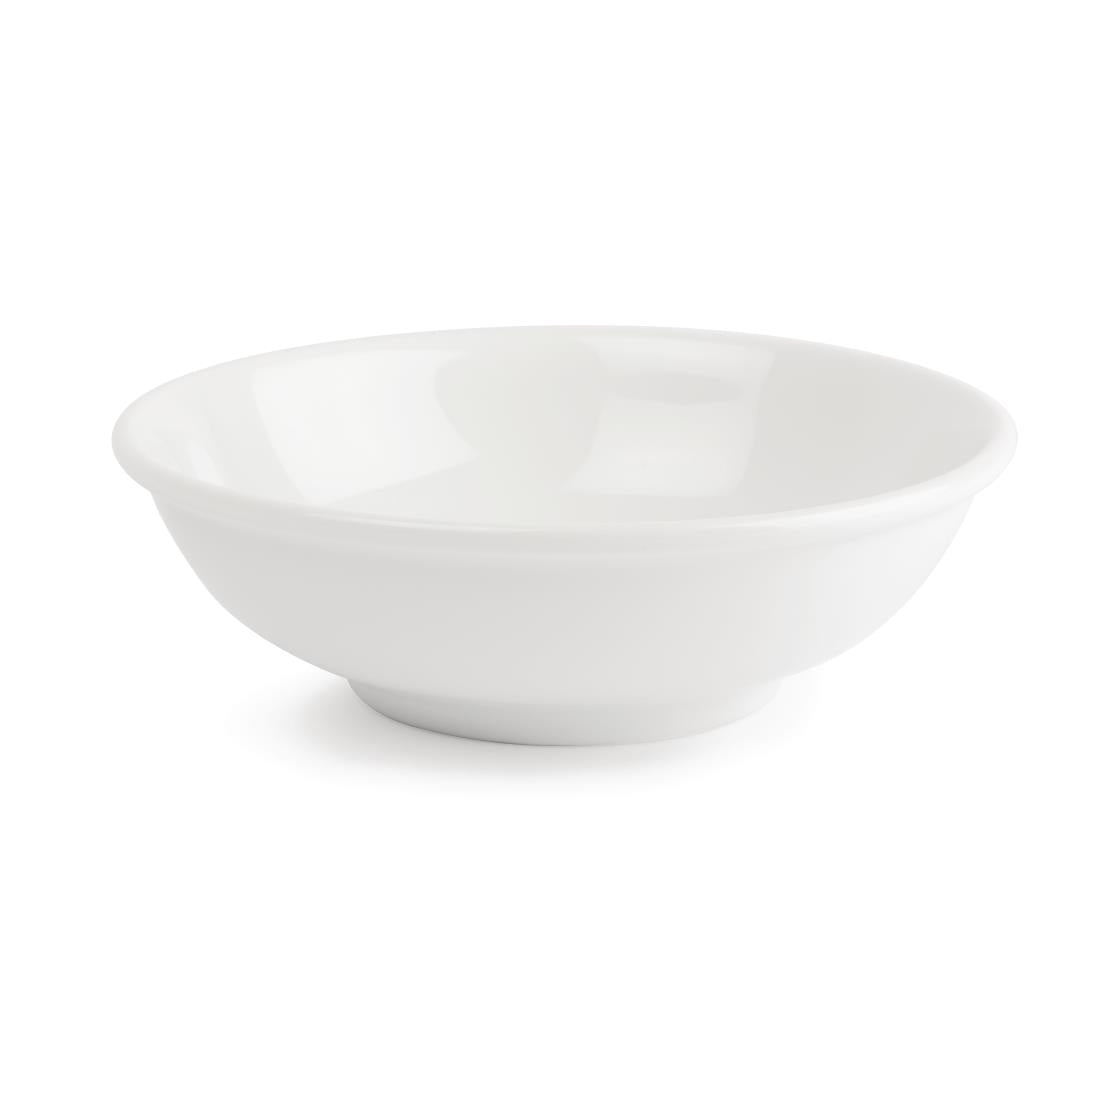 CG056 Royal Porcelain Classic White Cereal Bowls 165mm (Pack of 12)